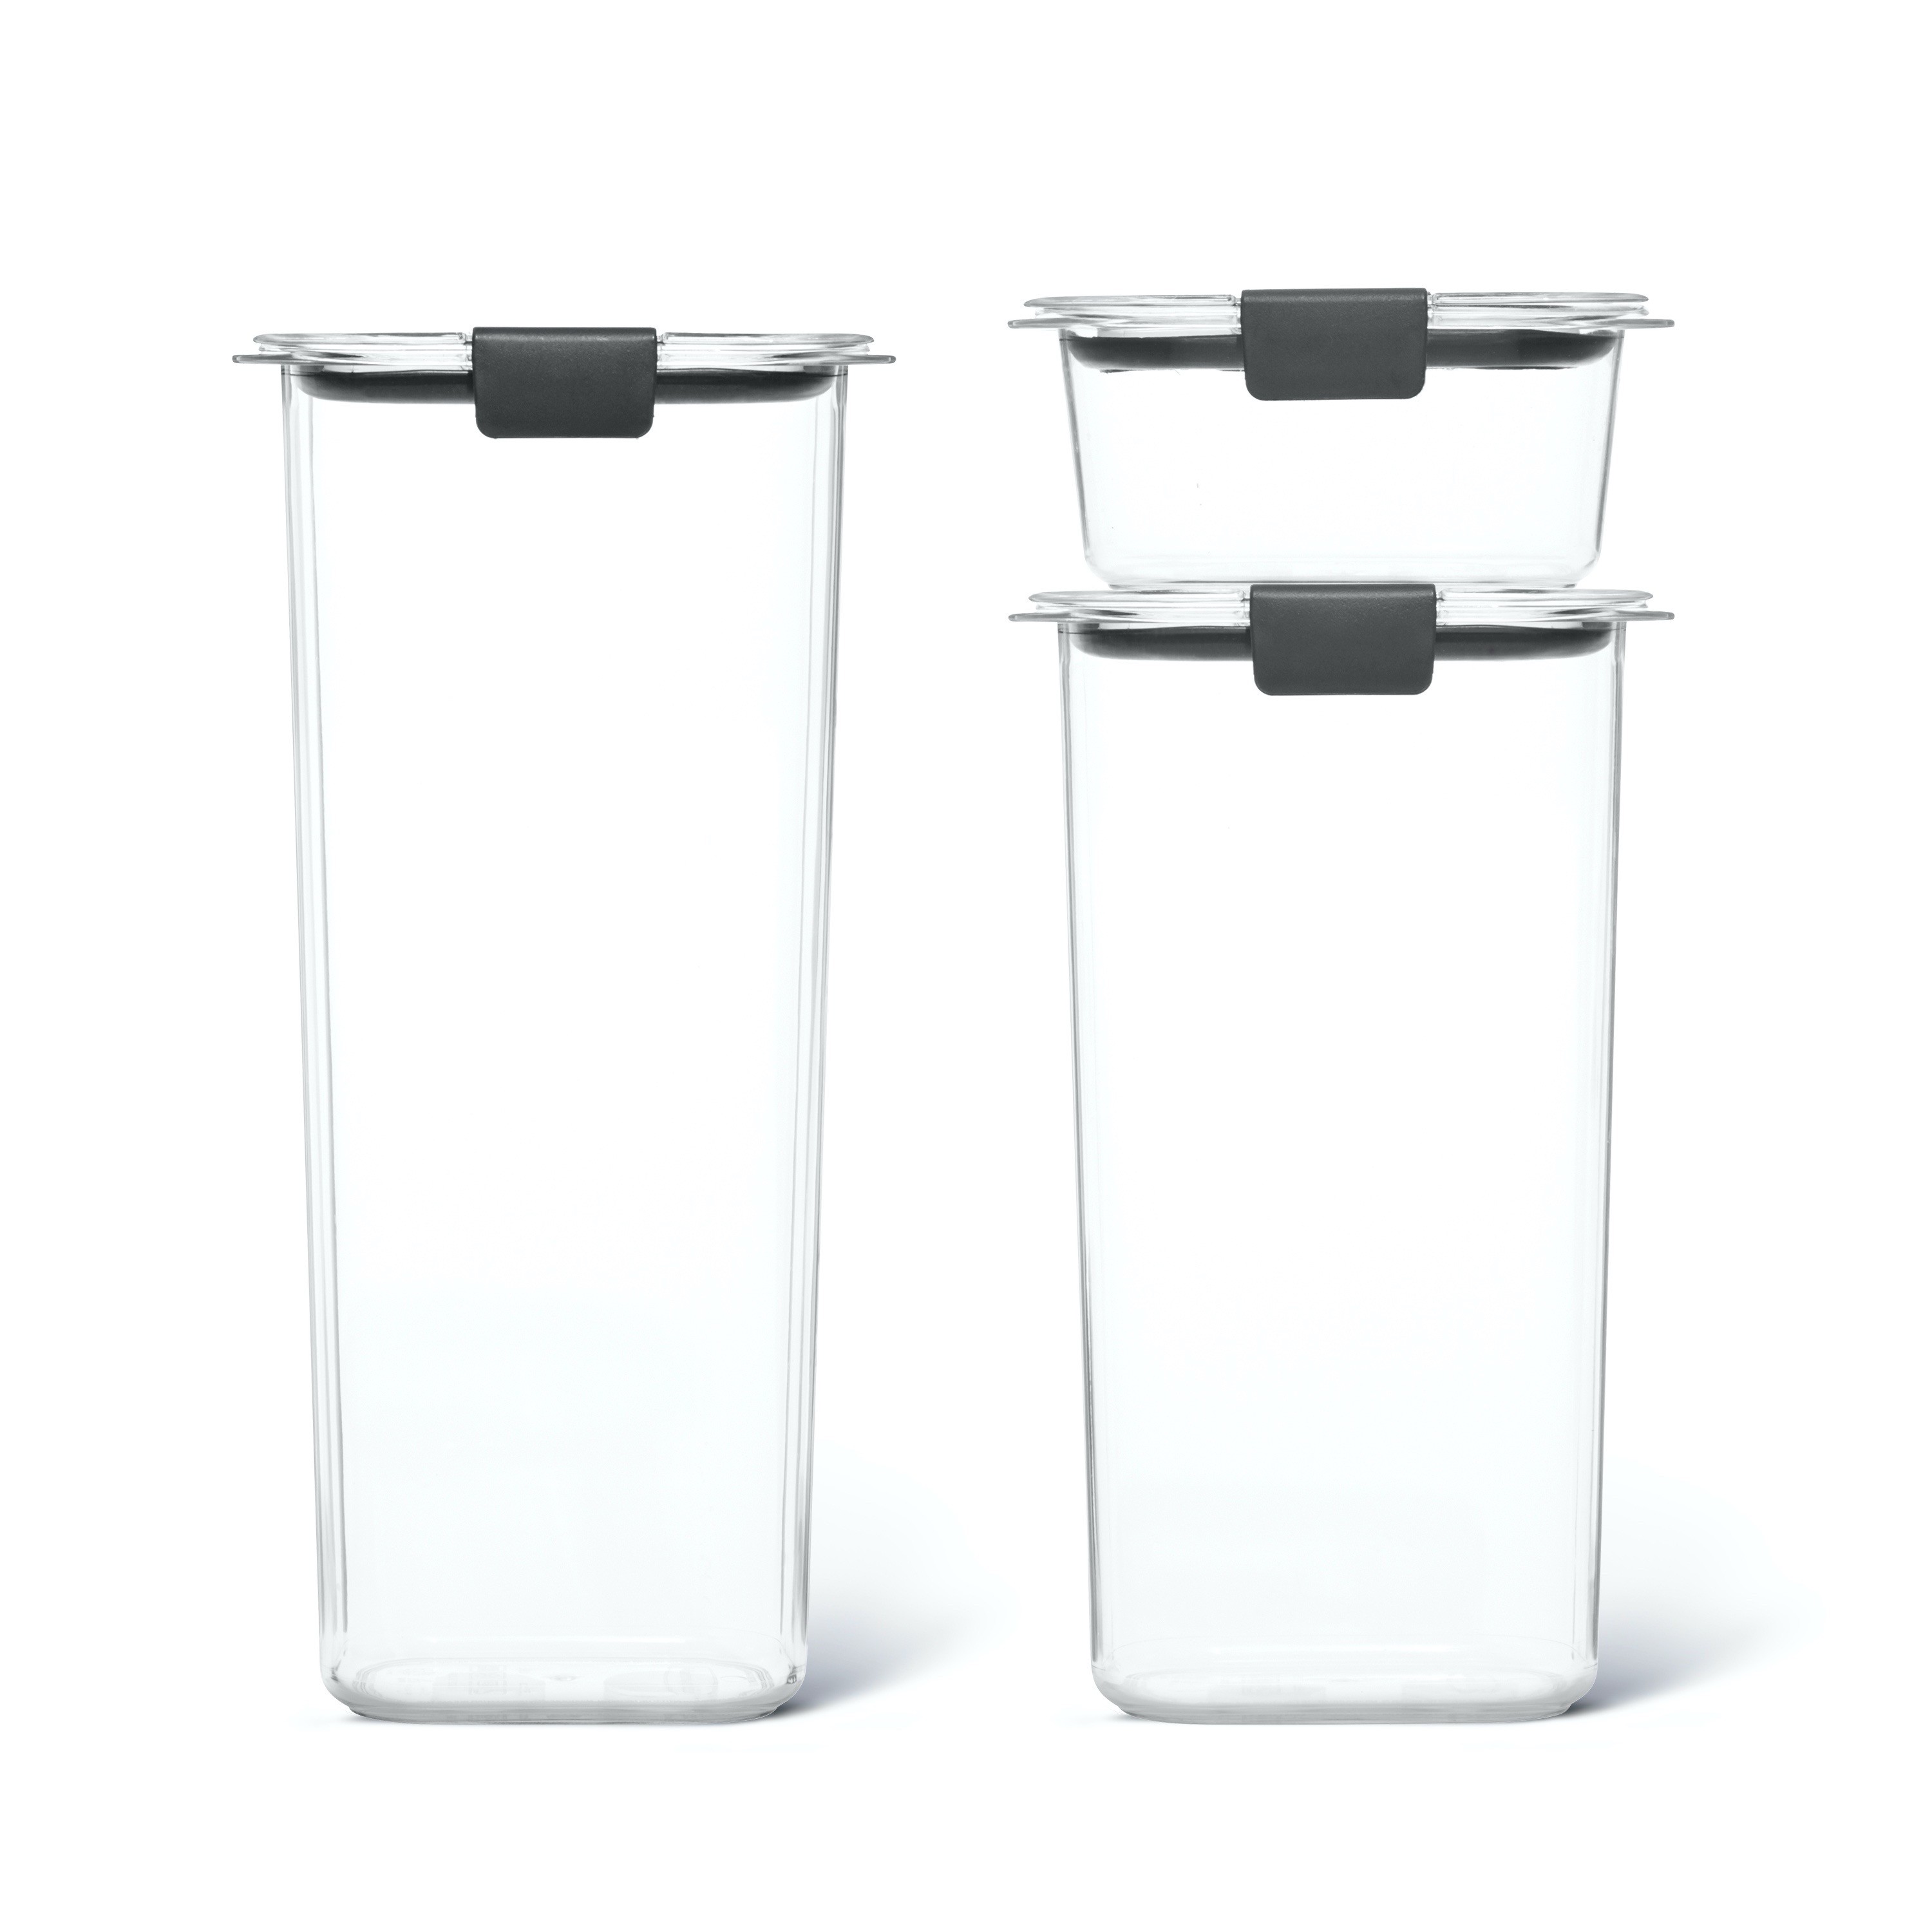 Rubbermaid Brilliance Pantry Set of 3 Food Storage Canisters with Latching Lids - image 1 of 4